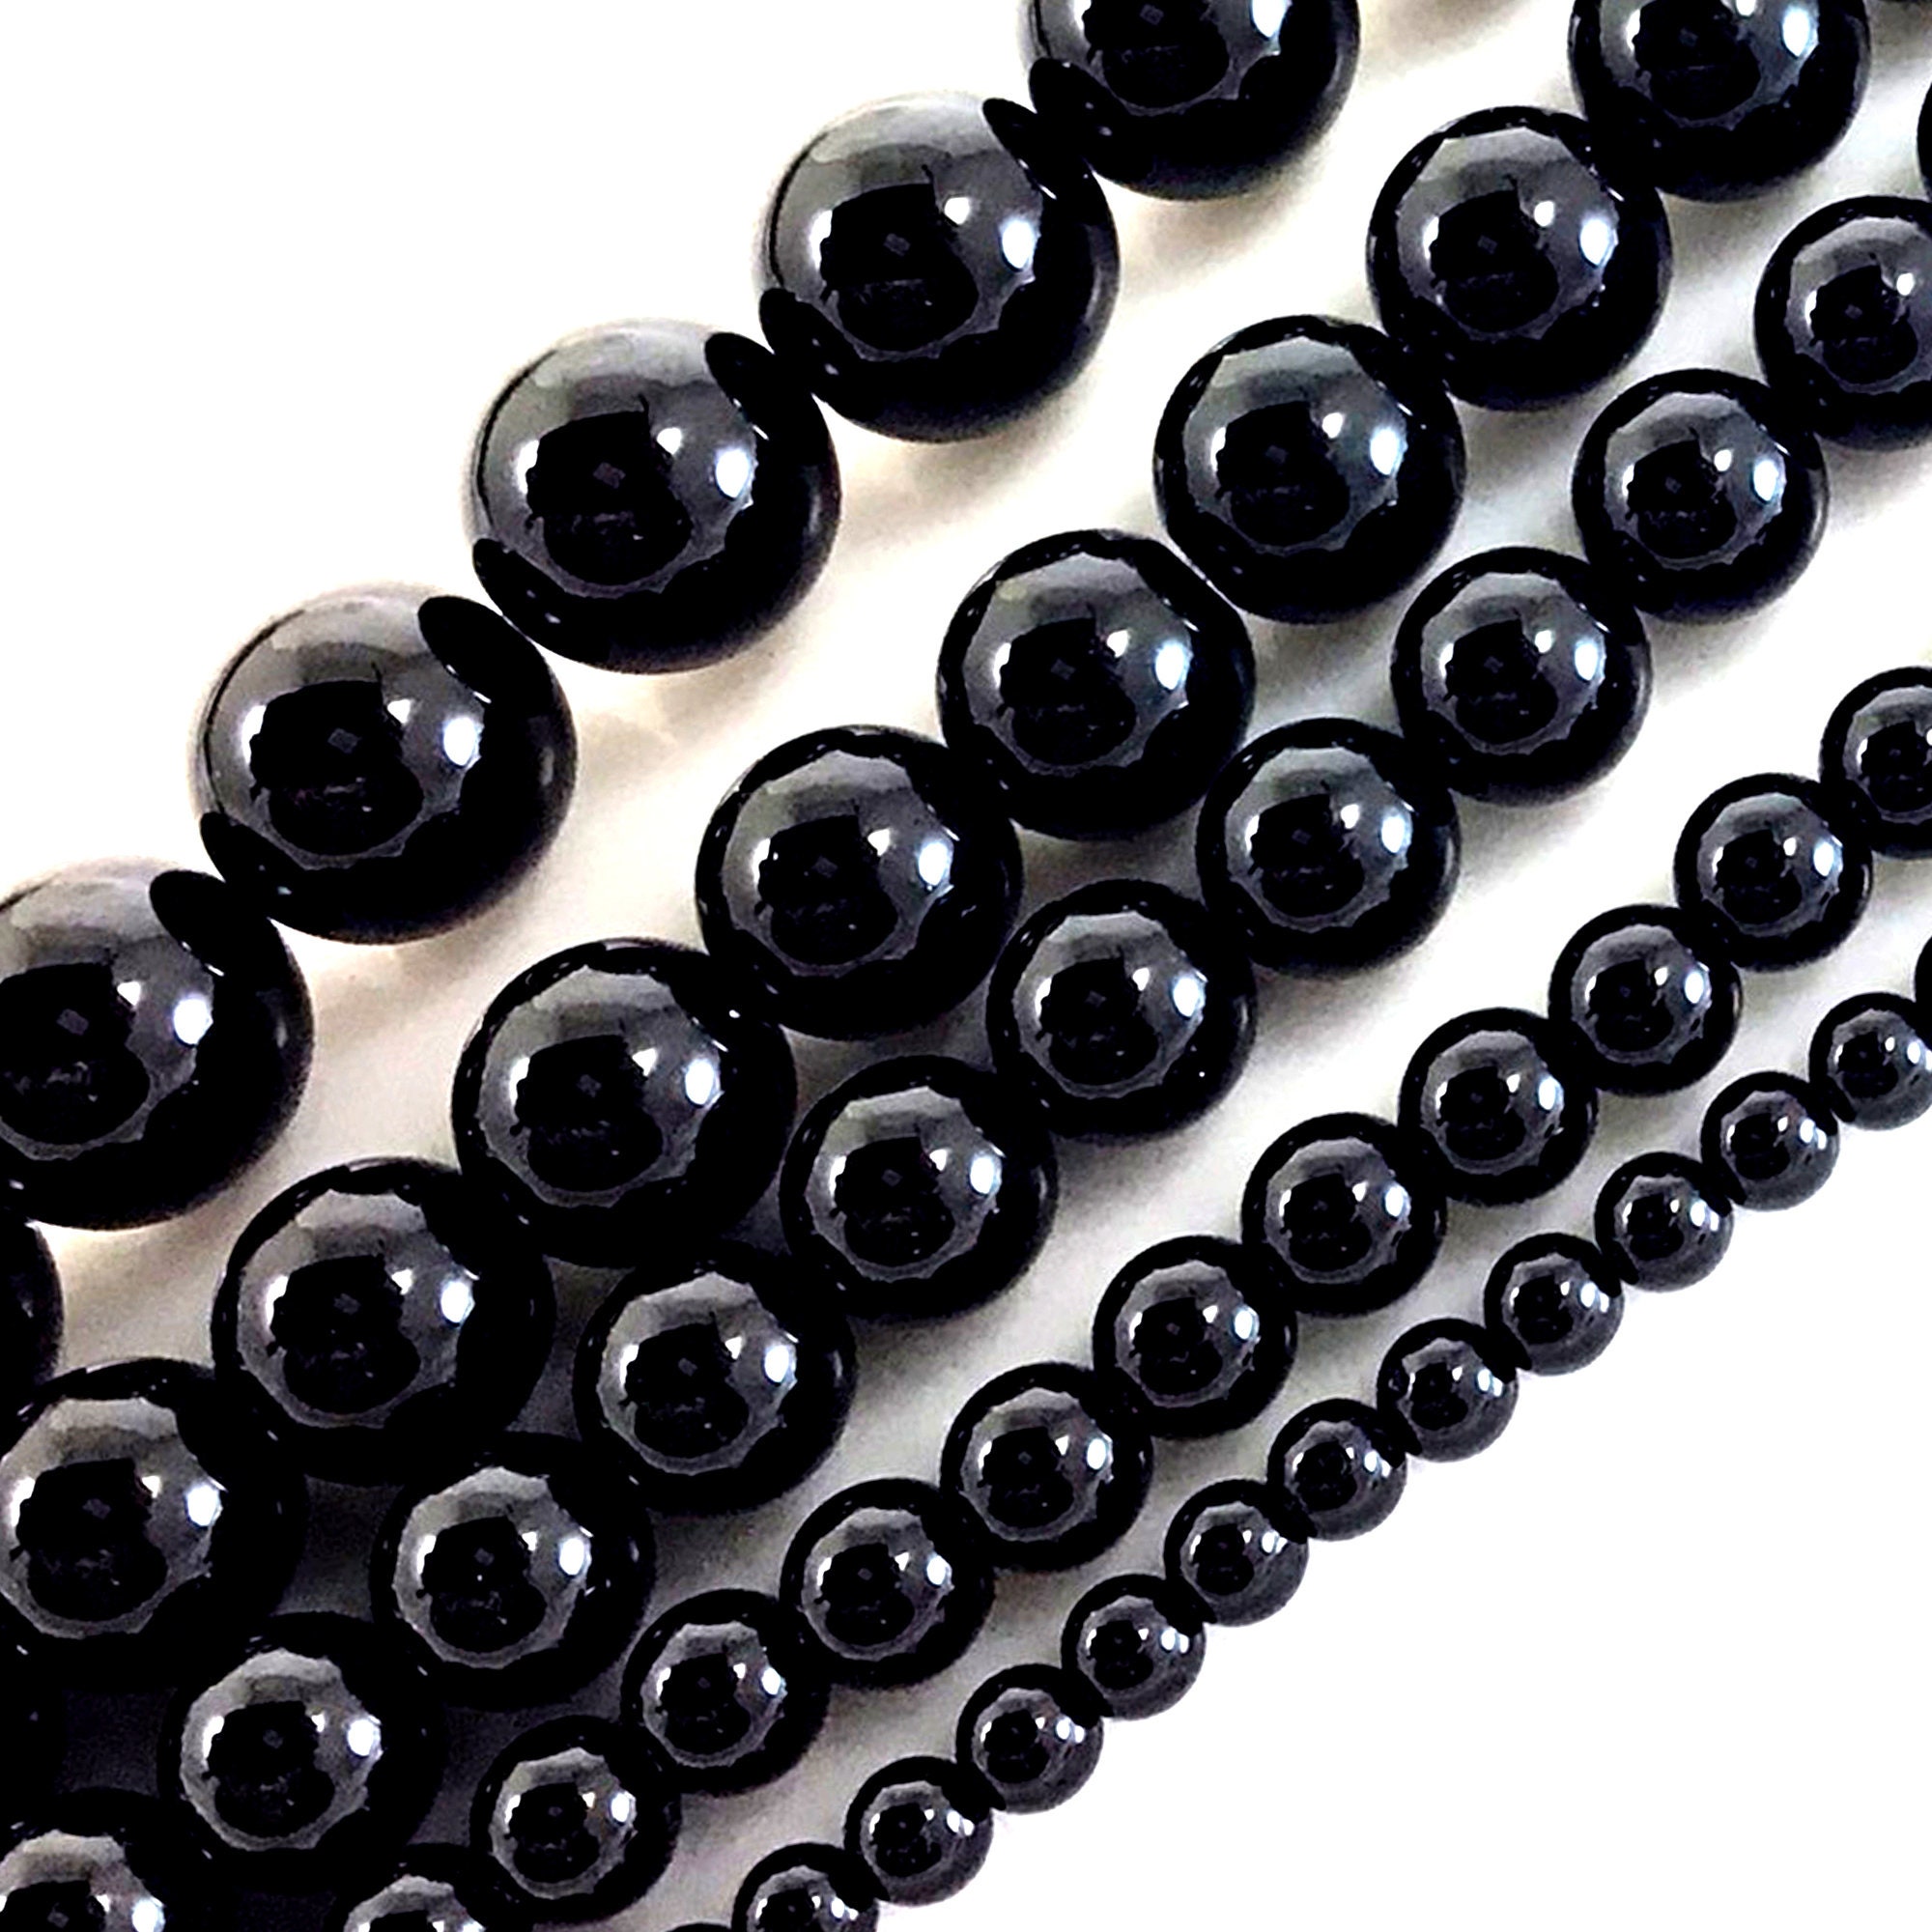 Wholesale Natural Gemstone Round Matte Spacer Loose Beads 4MM 6MM 8MM 10MM 12MM 